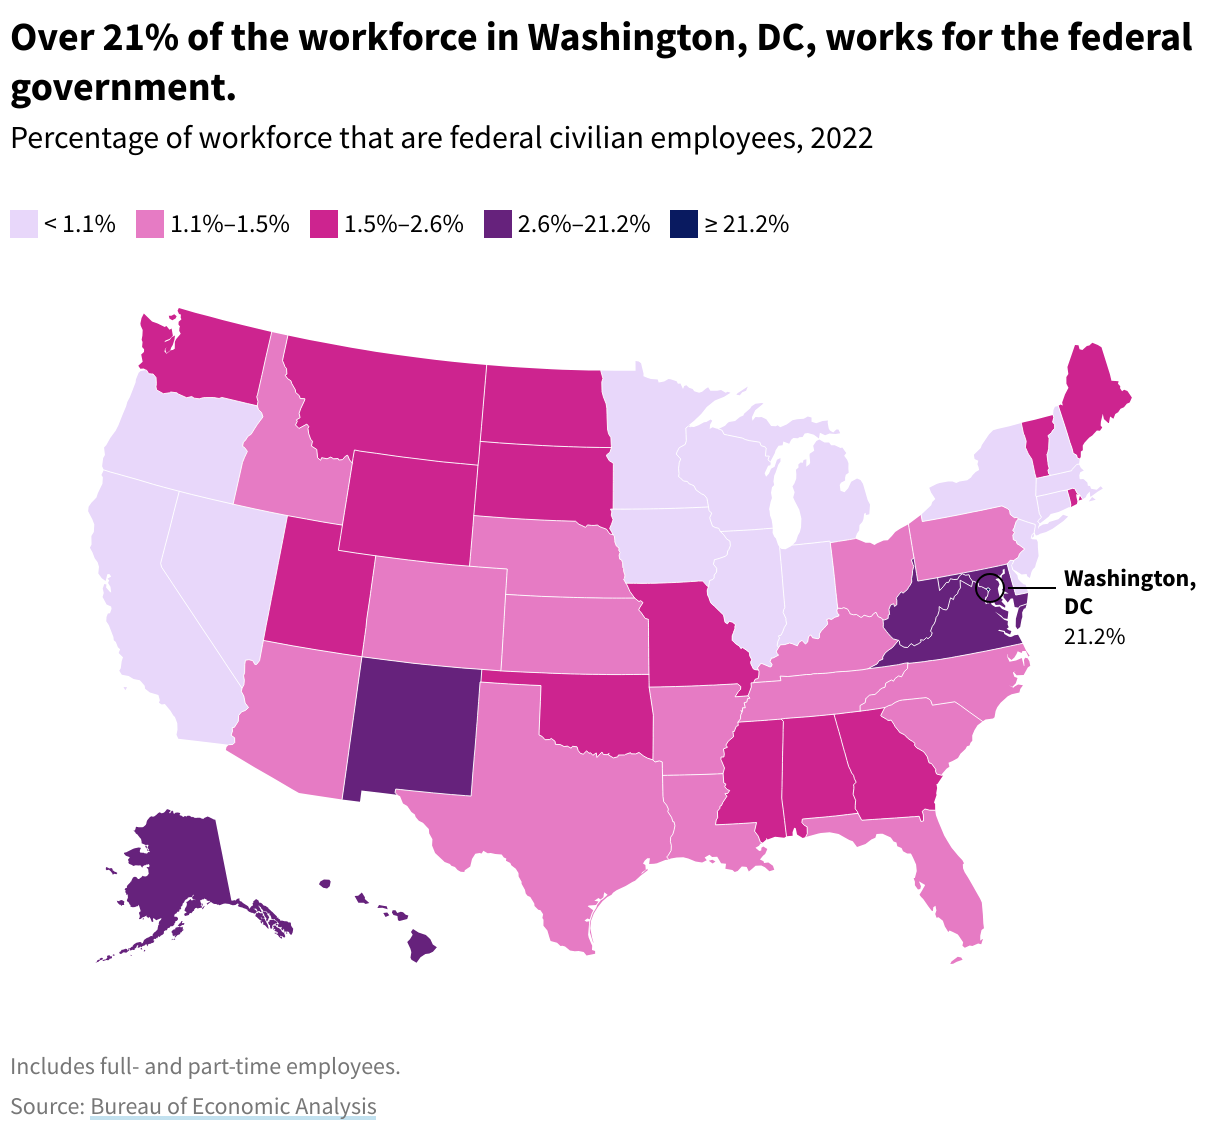 Map showing the percentage of workforce that are federal civilian employees by state in 2022.